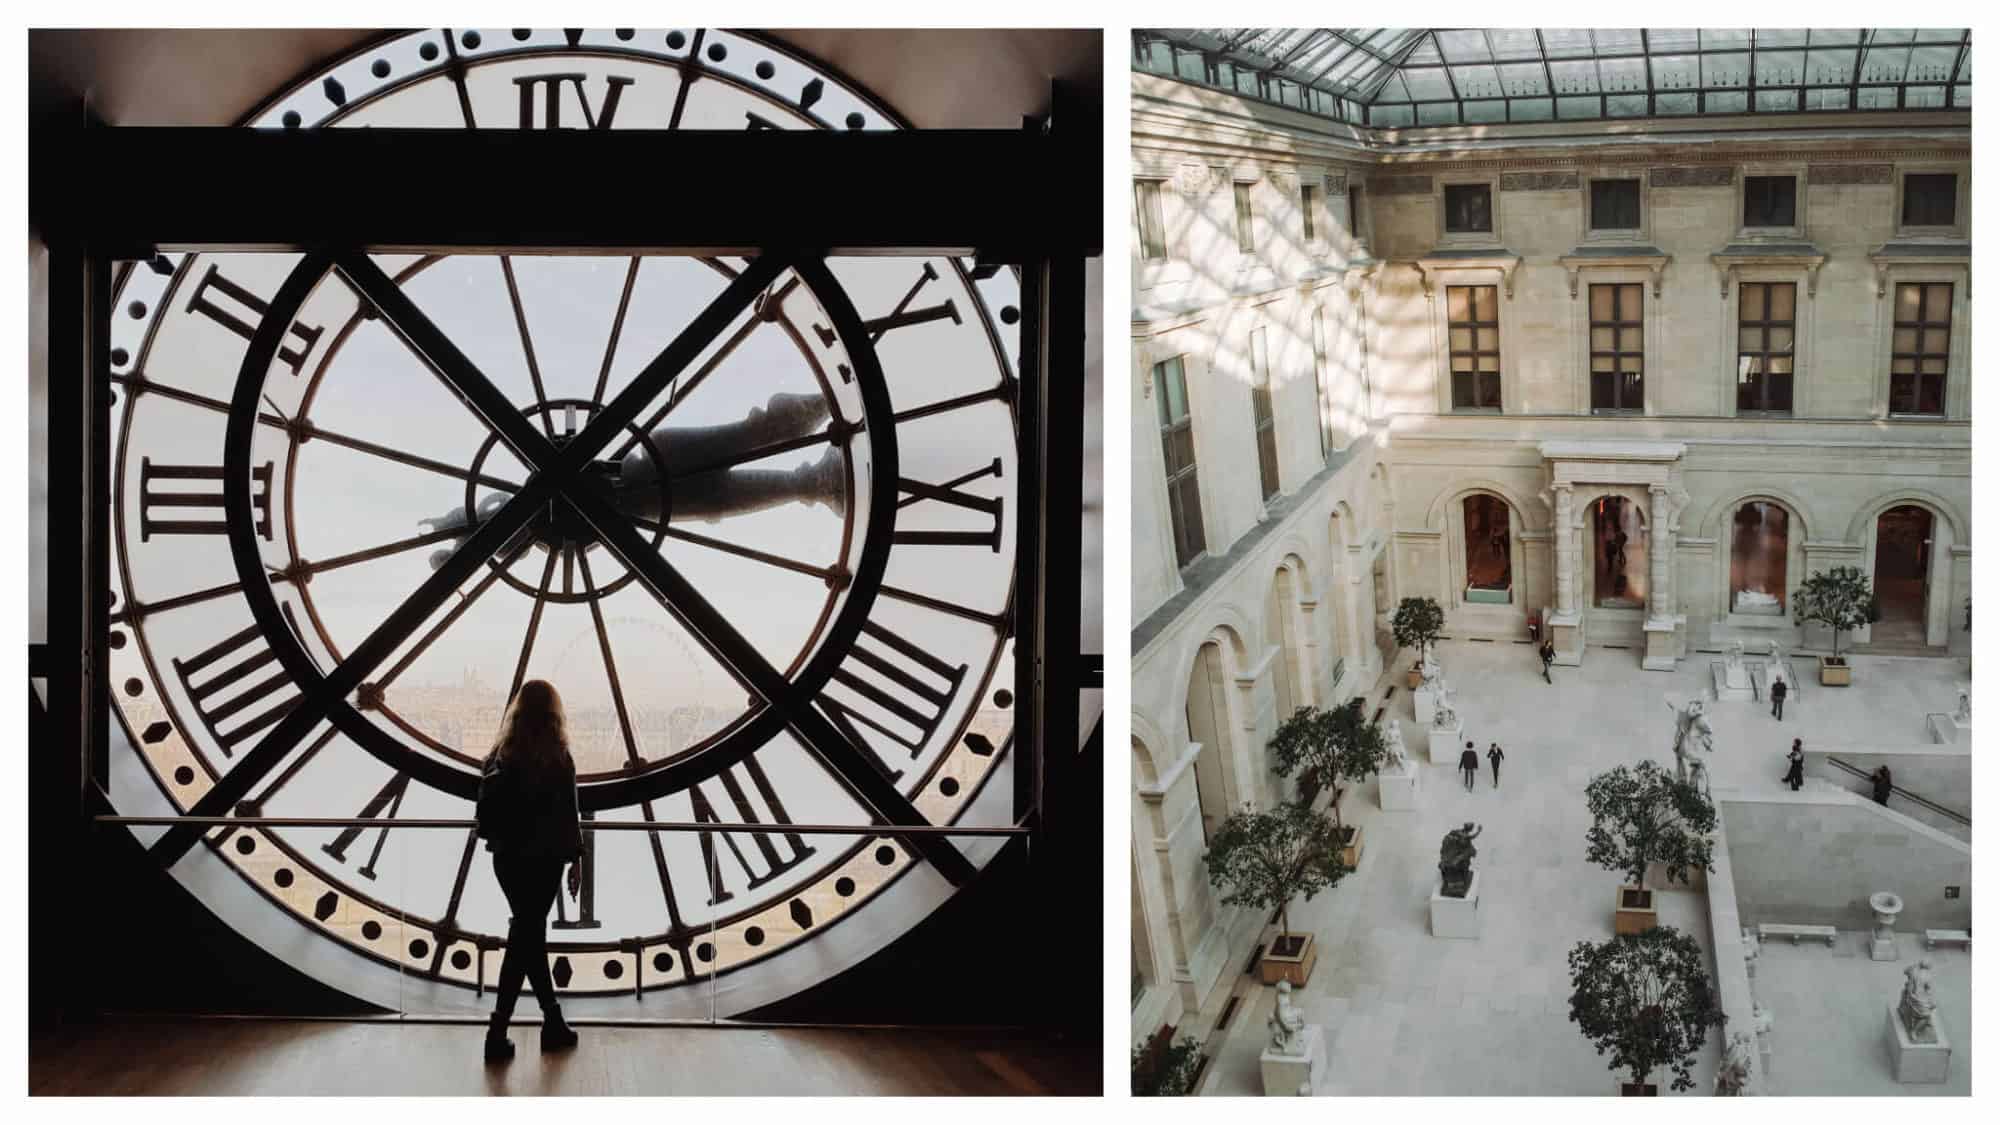 Left: A woman standing in front of a window at the D'Orsay Museum. The window is actually a large clock face, with Roman numerals and clock hands. The photo is taken from behind and she and the clock face are silhouetted. Right: the inner sculpture courtyard at the Louvre Museum. The photo is taken from up high, looking down. There are archways and windows along the walls. There are trees in pots, white sculptures, and some people. The sun shines in from the glass roof onto the wall. 